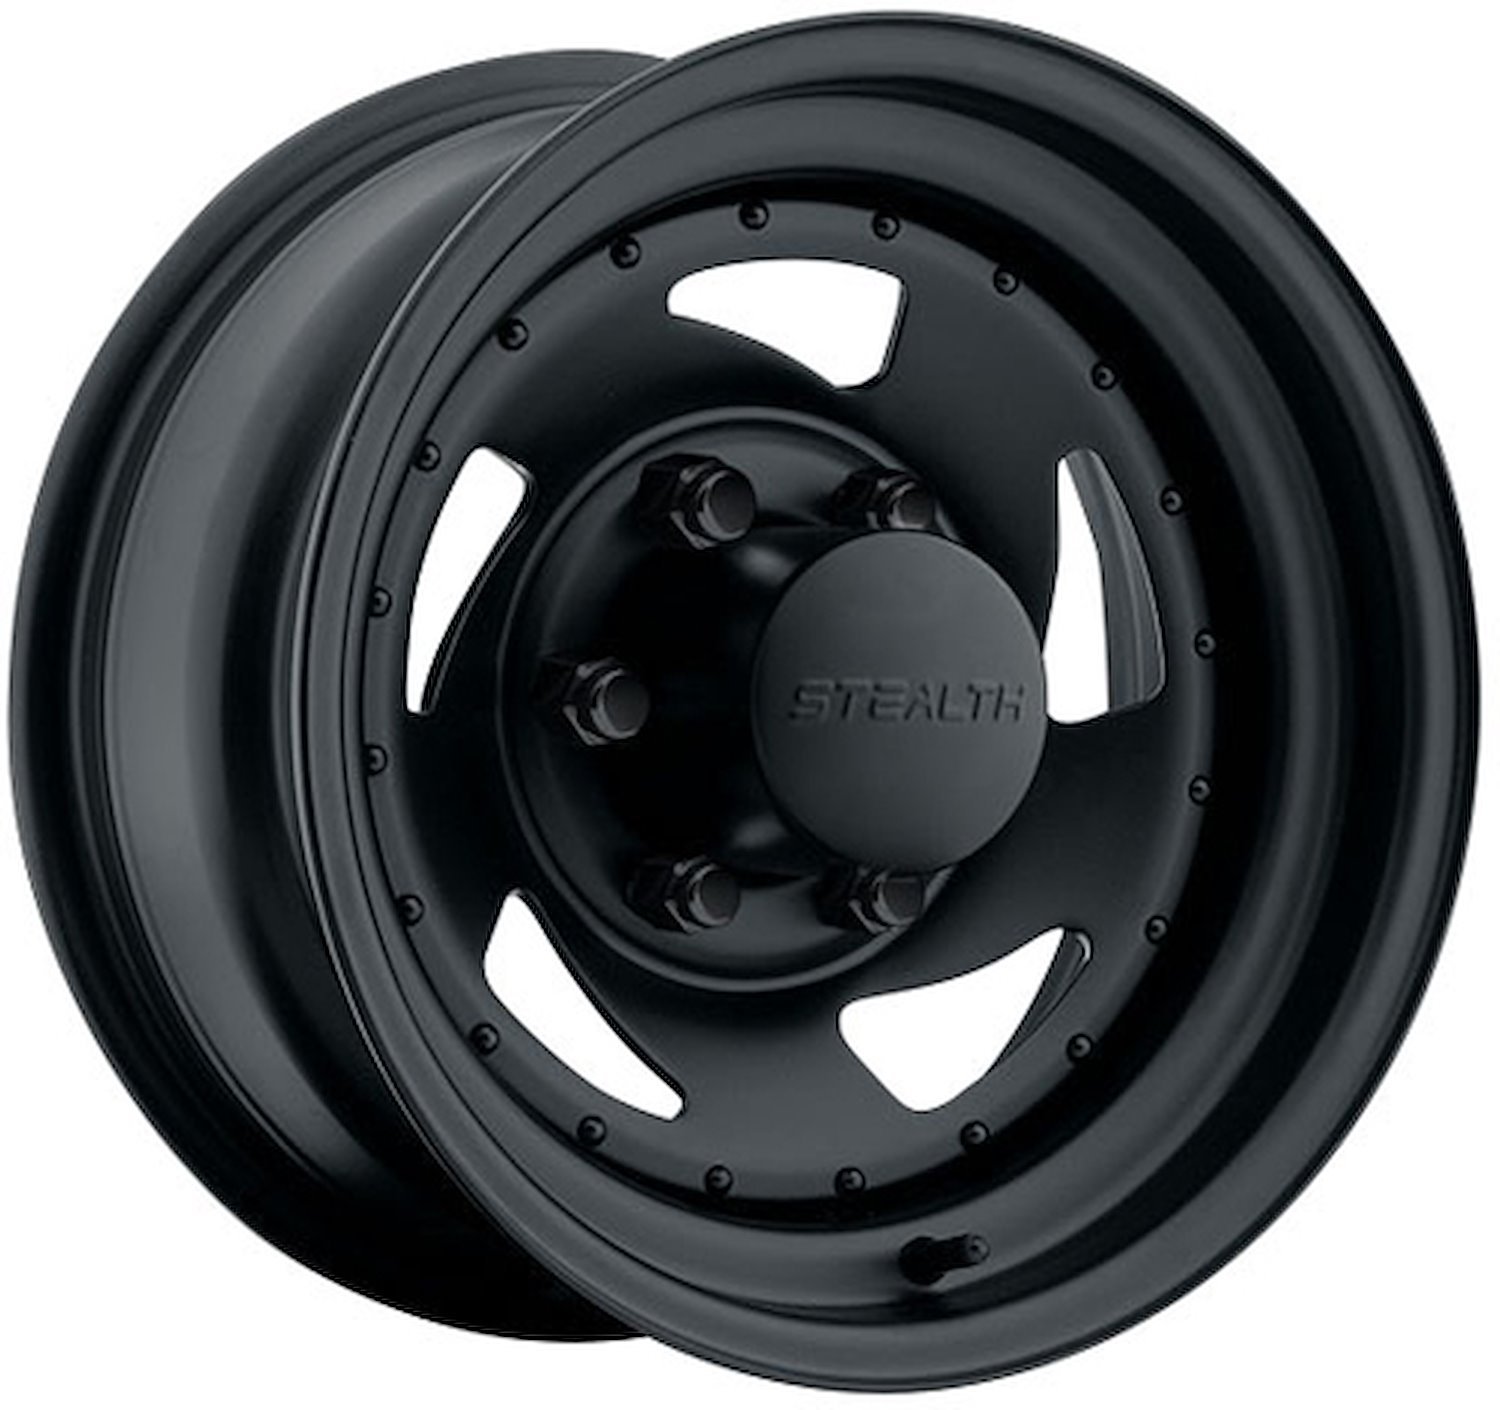 STEALTH BLACK BLADE 15 x 7 5 x 45 Bolt Circle 45 Back Spacing +13 offset 33 Center Bore 1600 lbs Load Rating